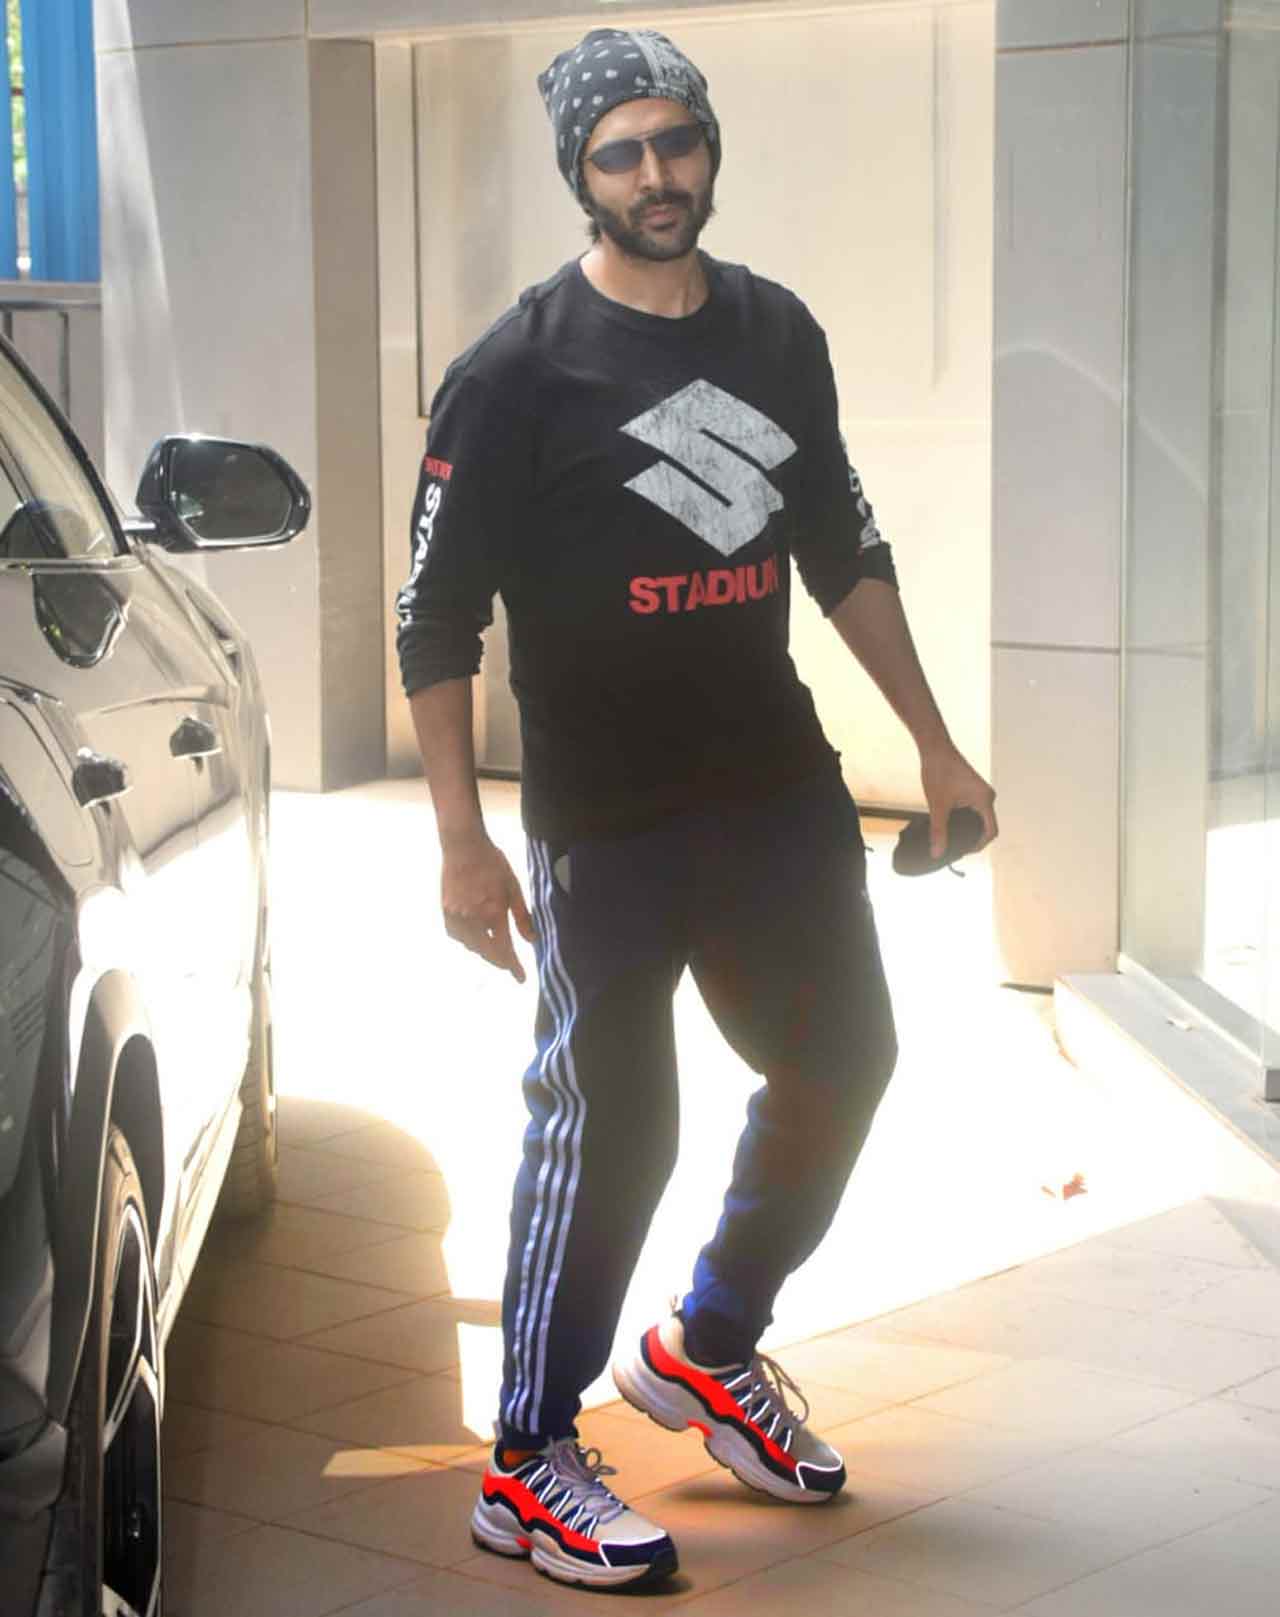 Dhamaka actor Kartik Aaryan was also snapped in Mumbai. On the other hand, he also has 'Satyanarayan Ki Katha' which is all set to go on floors towards the end of this year.